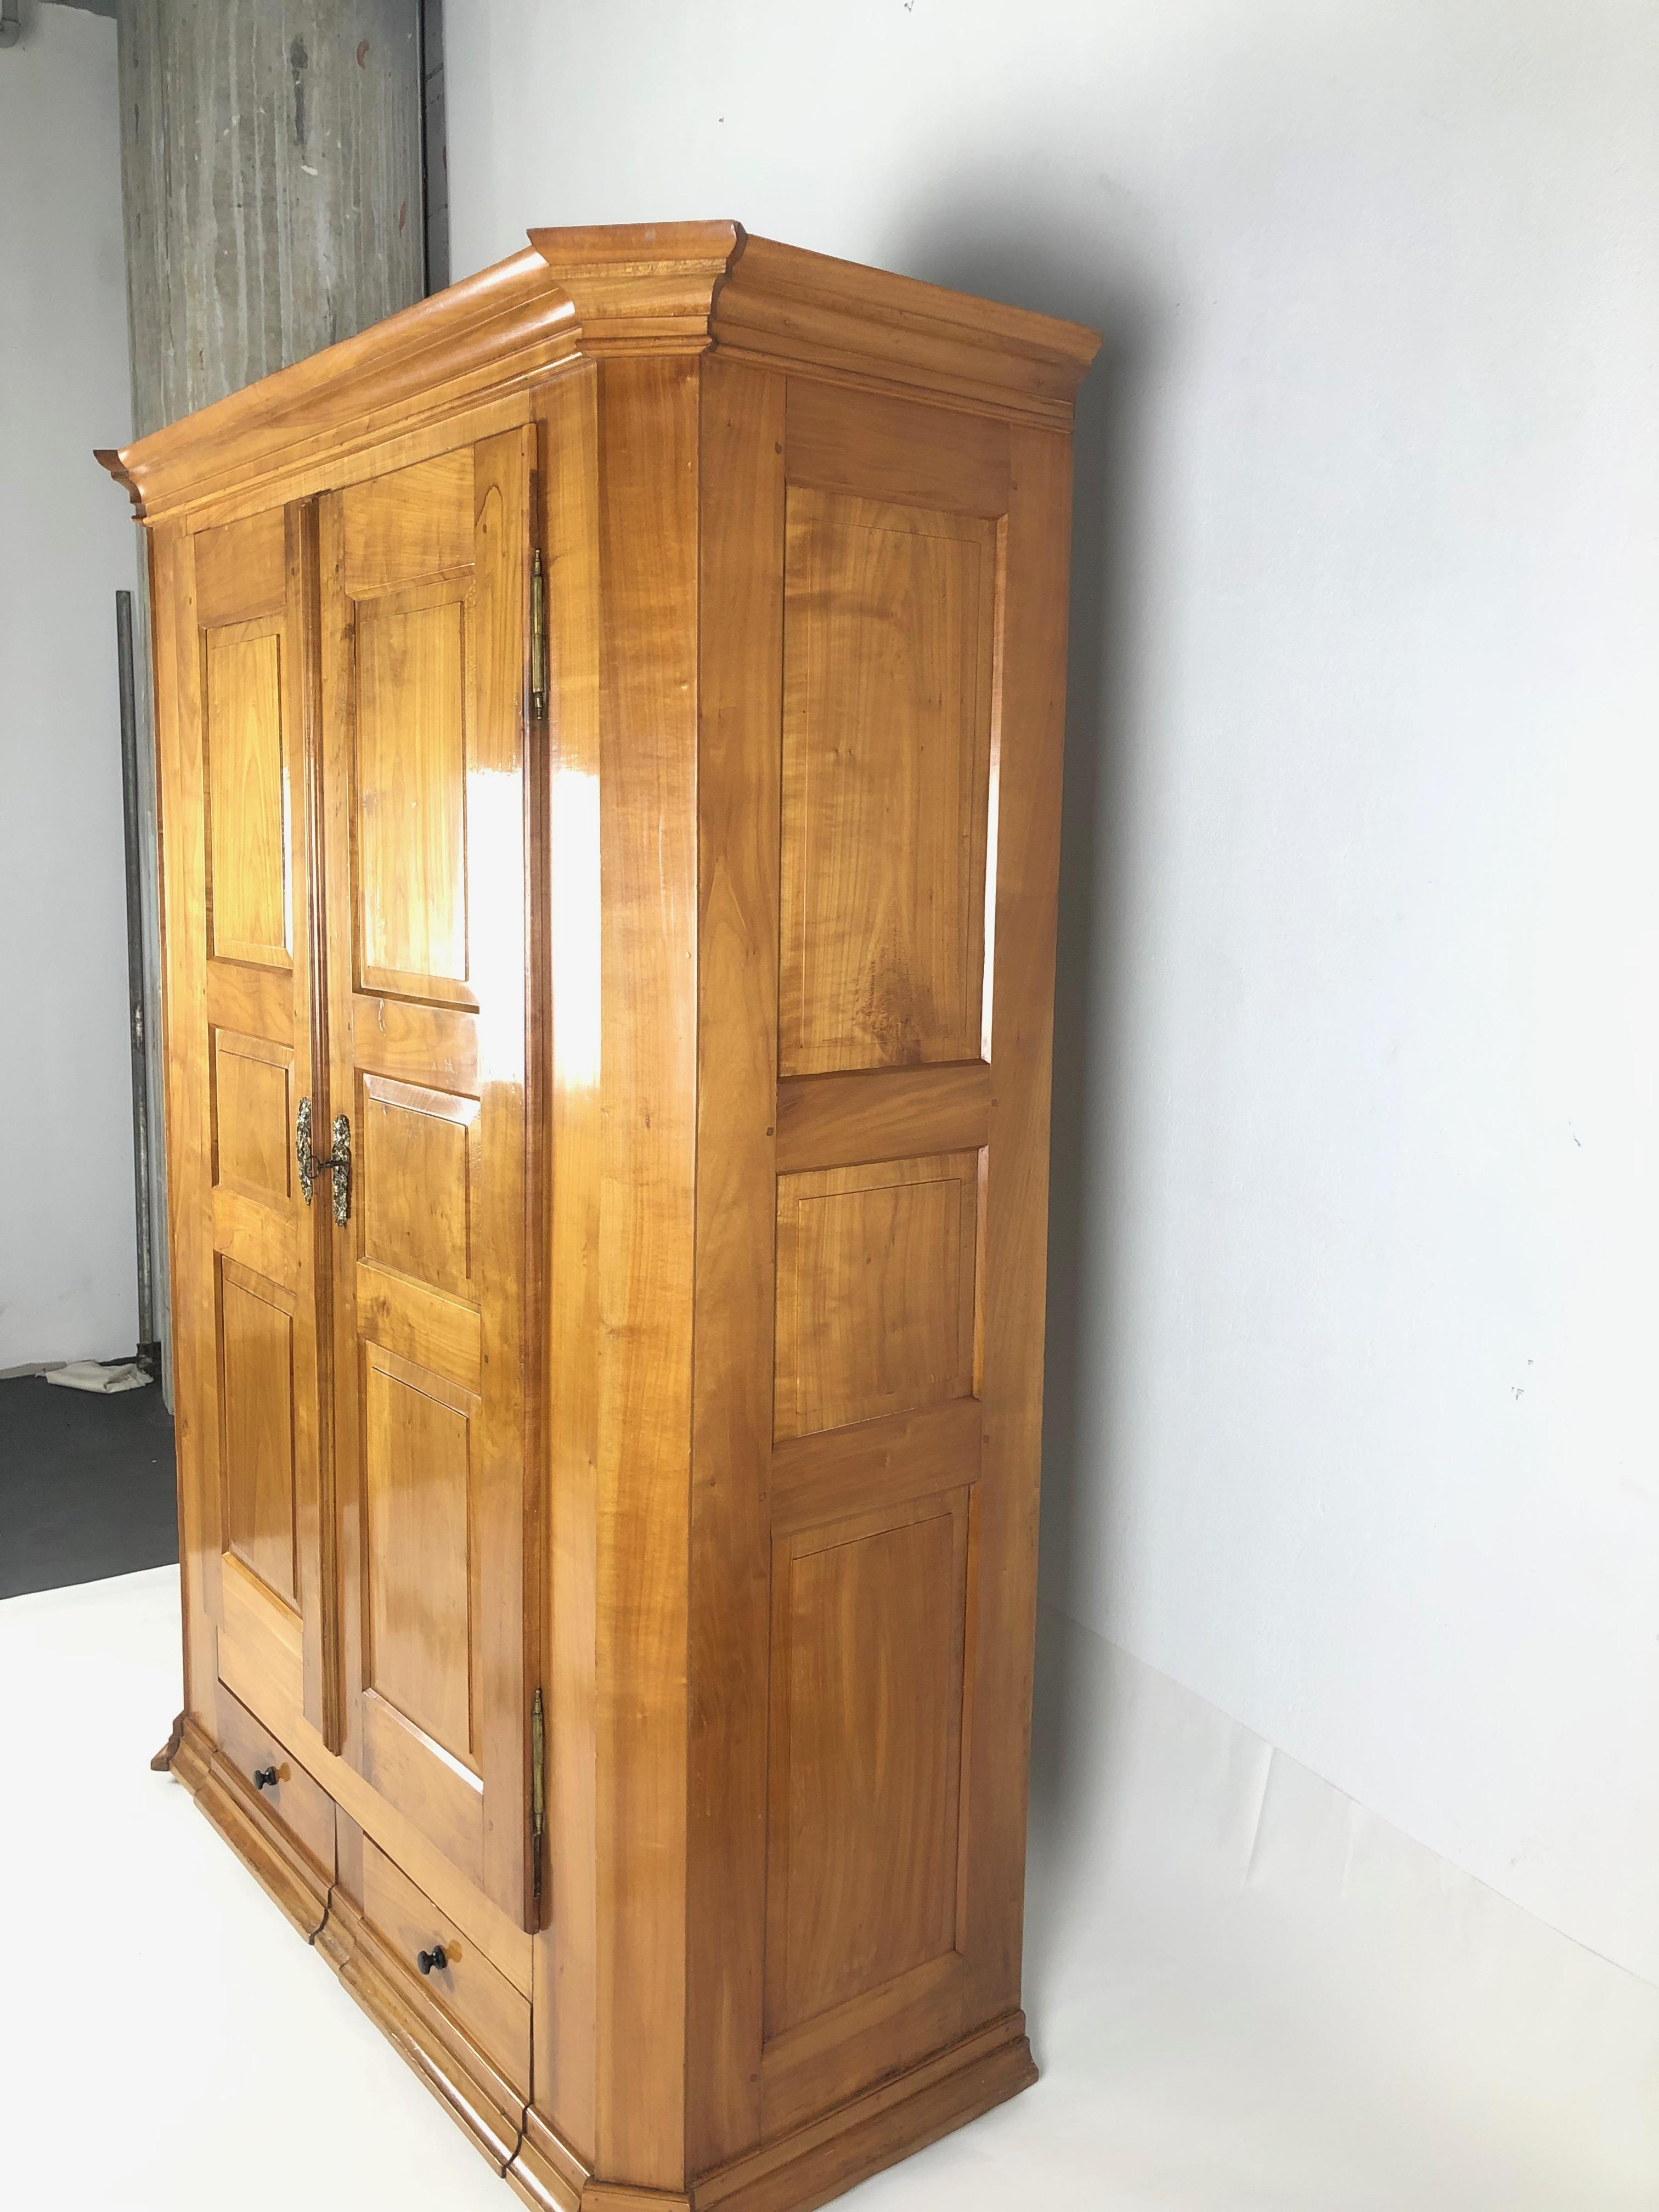 A two-door wooden cabinet from the Biedermeier era in high quality condition, the quality is shown through the refurbished frame and filling. 

With brass fittings and original locks, keys and key plates, along with beveled corners. 

At the